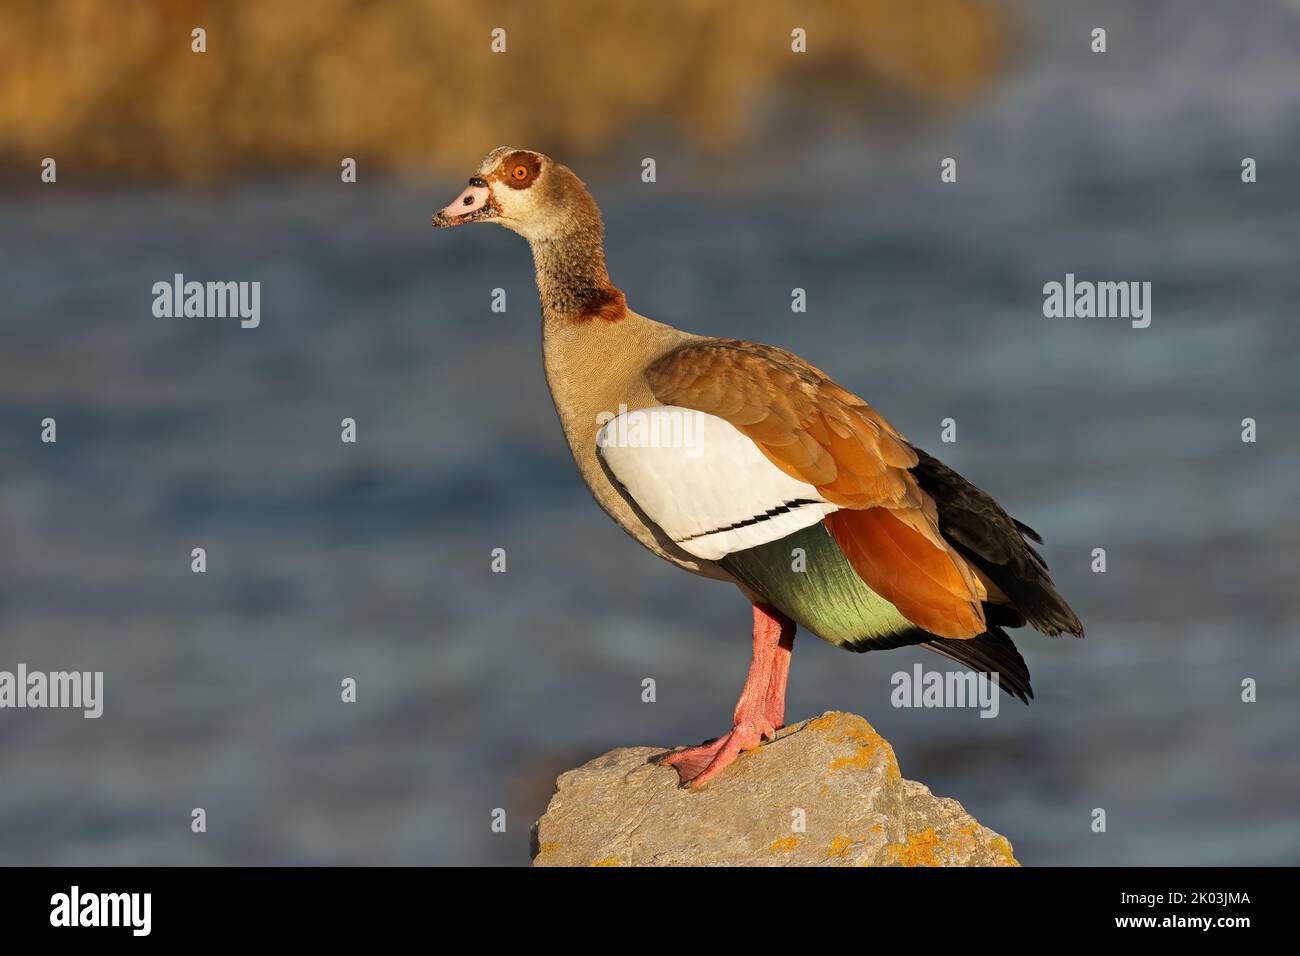 An Egyptian goose (Alopochen aegyptiacus) perched on  a rock, South Africa Stock Photo